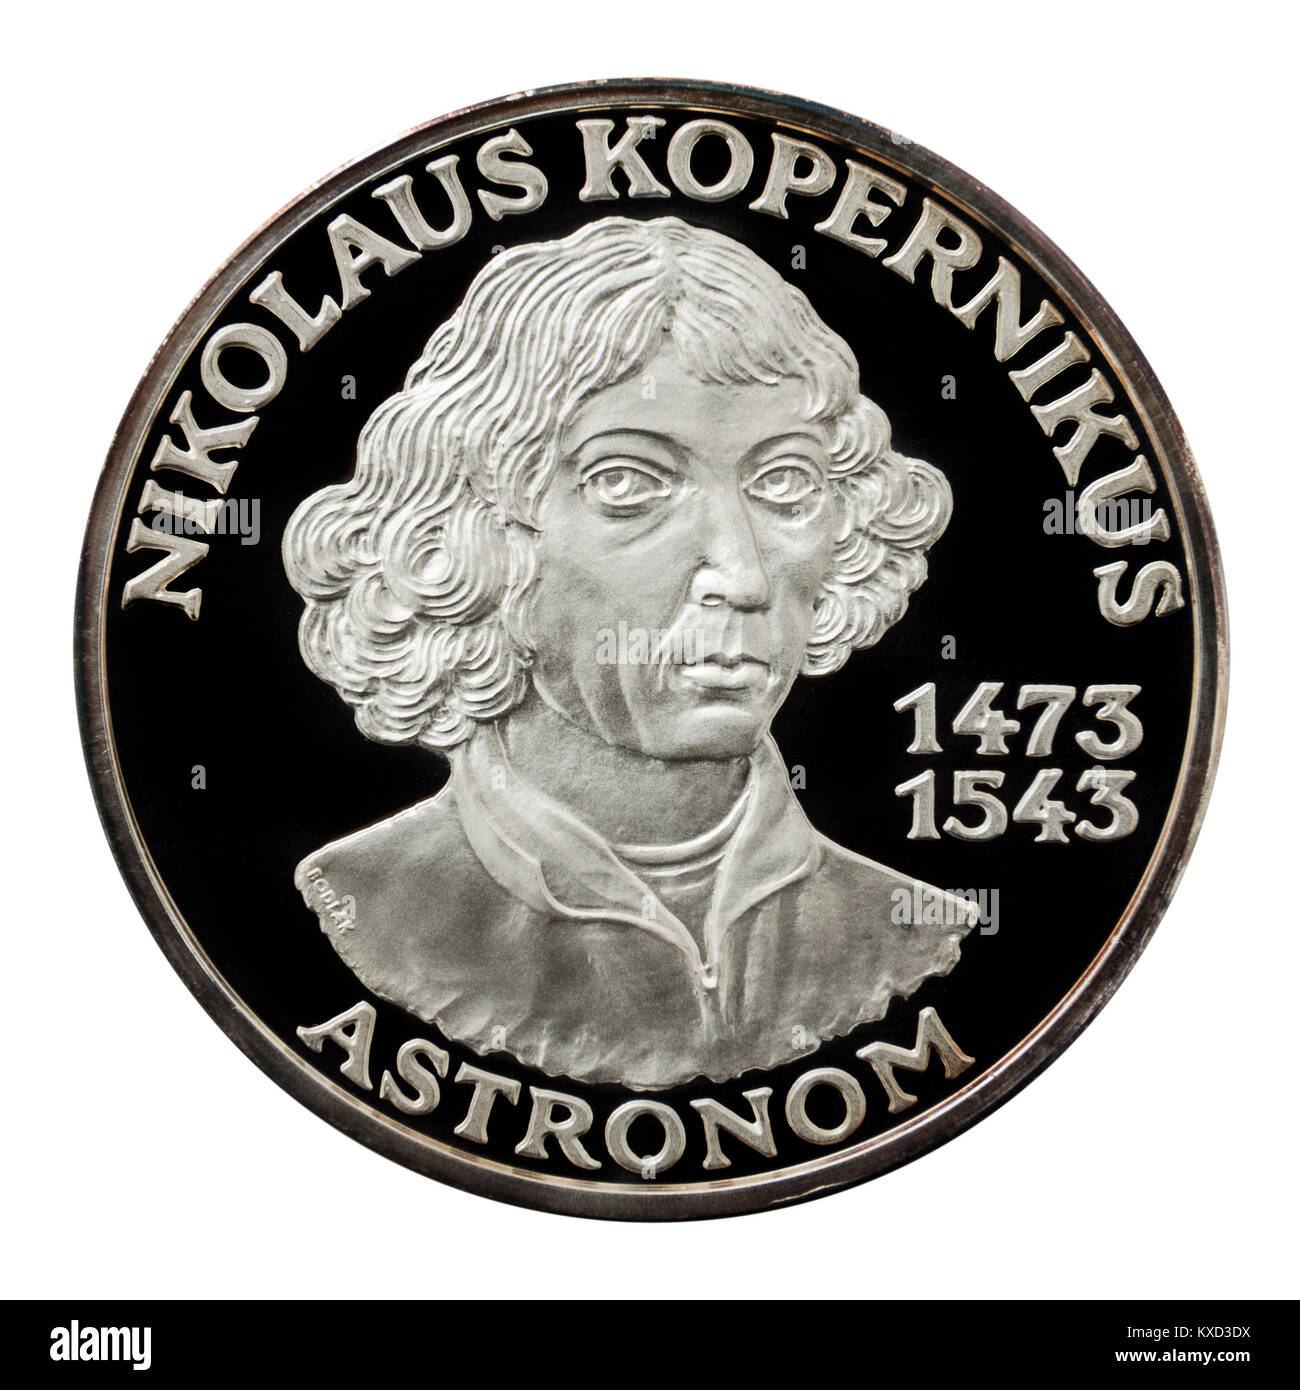 99.9% Proof Silver Medallion featuring Nicolaus Copernicus, the famous Polish astronomer, mathematician and economist. Stock Photo